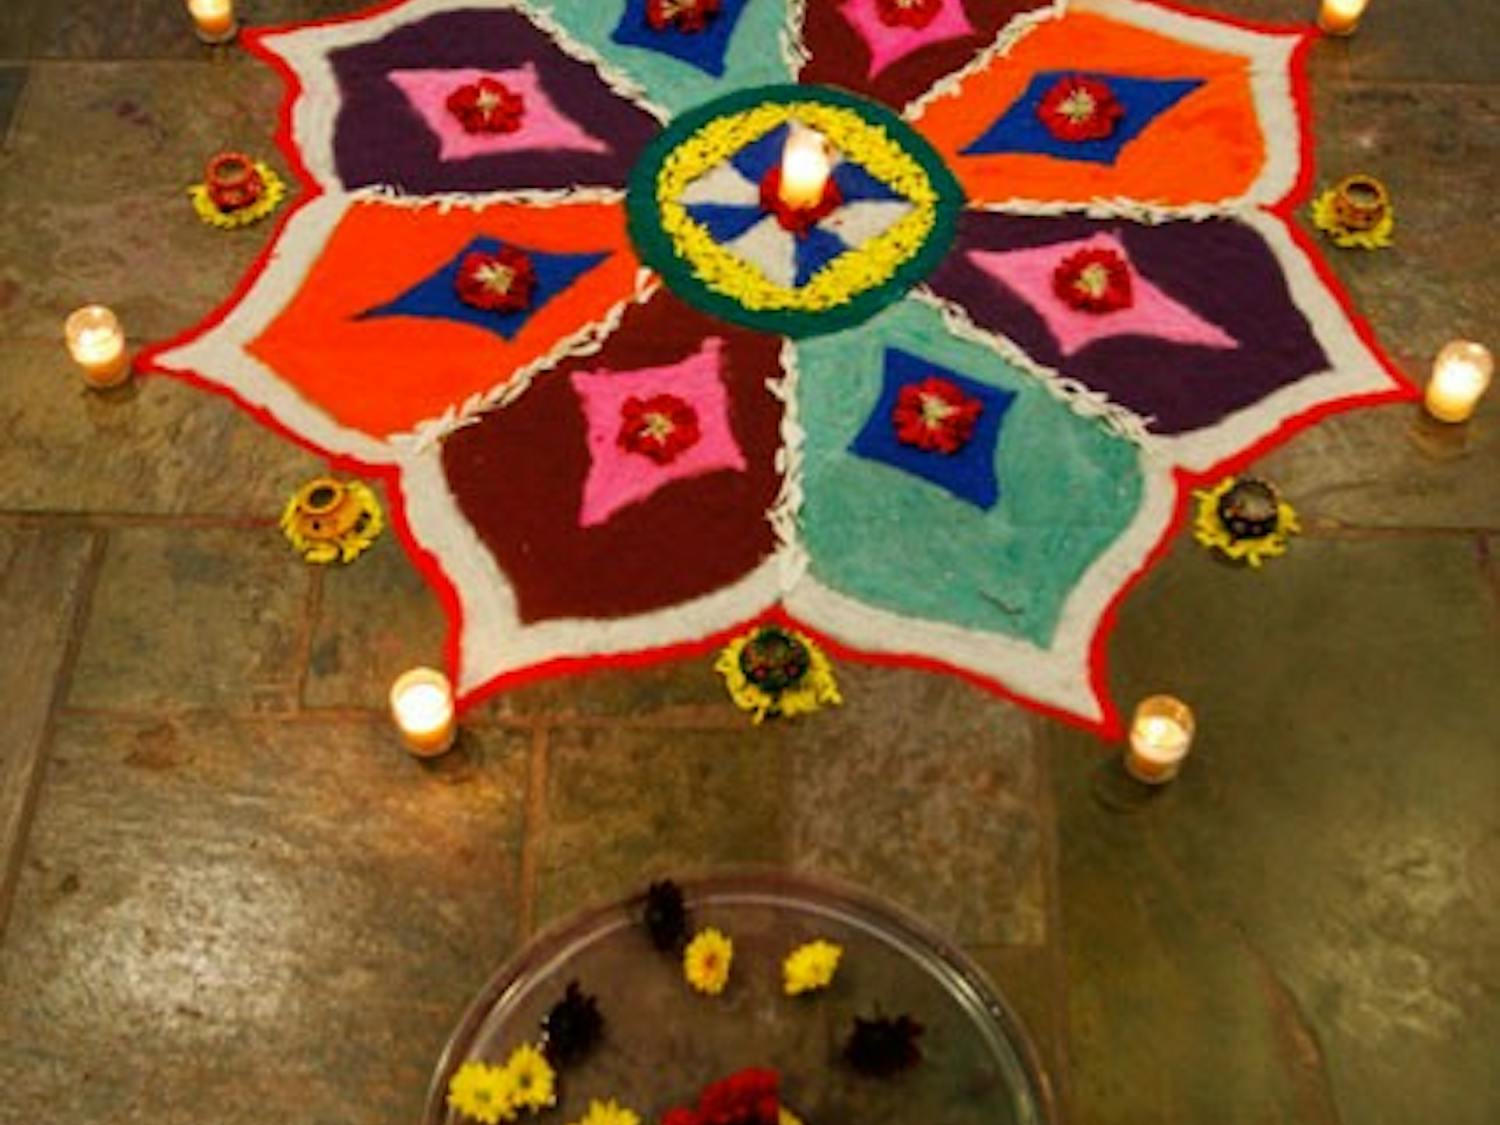 Divaali, "Festival of Lights", marks the beginning of the new Hindu new year. Students celebrate the festival in the Great Hall.